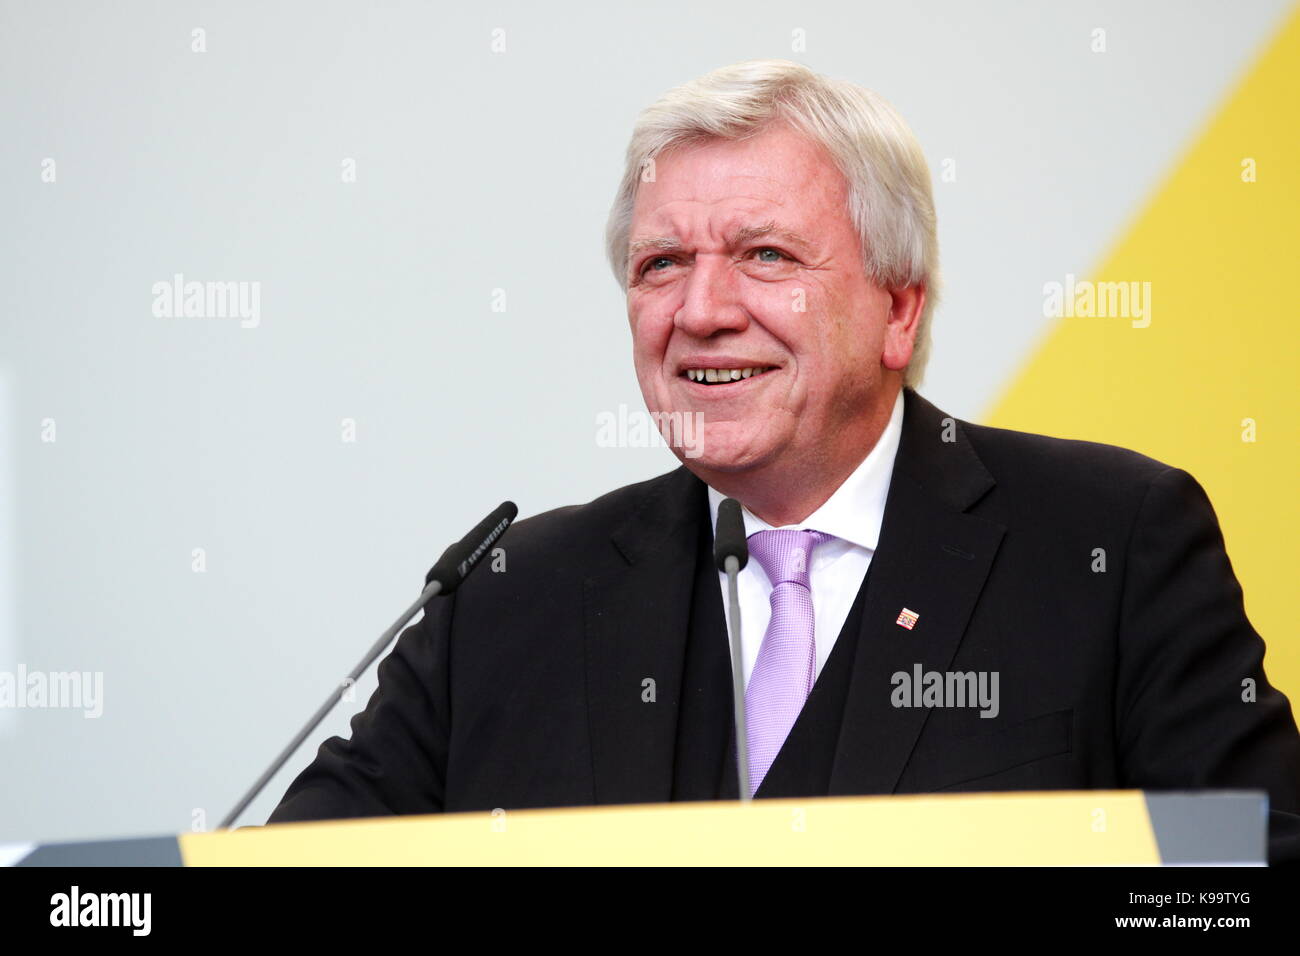 Giessen, Germany. 21st September, 2017. Volker Bouffier, prime minister of german state Hesse, speaks at election campaign event of Angela Merkel, Chancellor of Germany and leader of the Christian Democratic Union, to the federal Bundestag elections (24th Sept 2017) at Brandplatz in Giessen, Germany. Credit: Christian Lademann Stock Photo